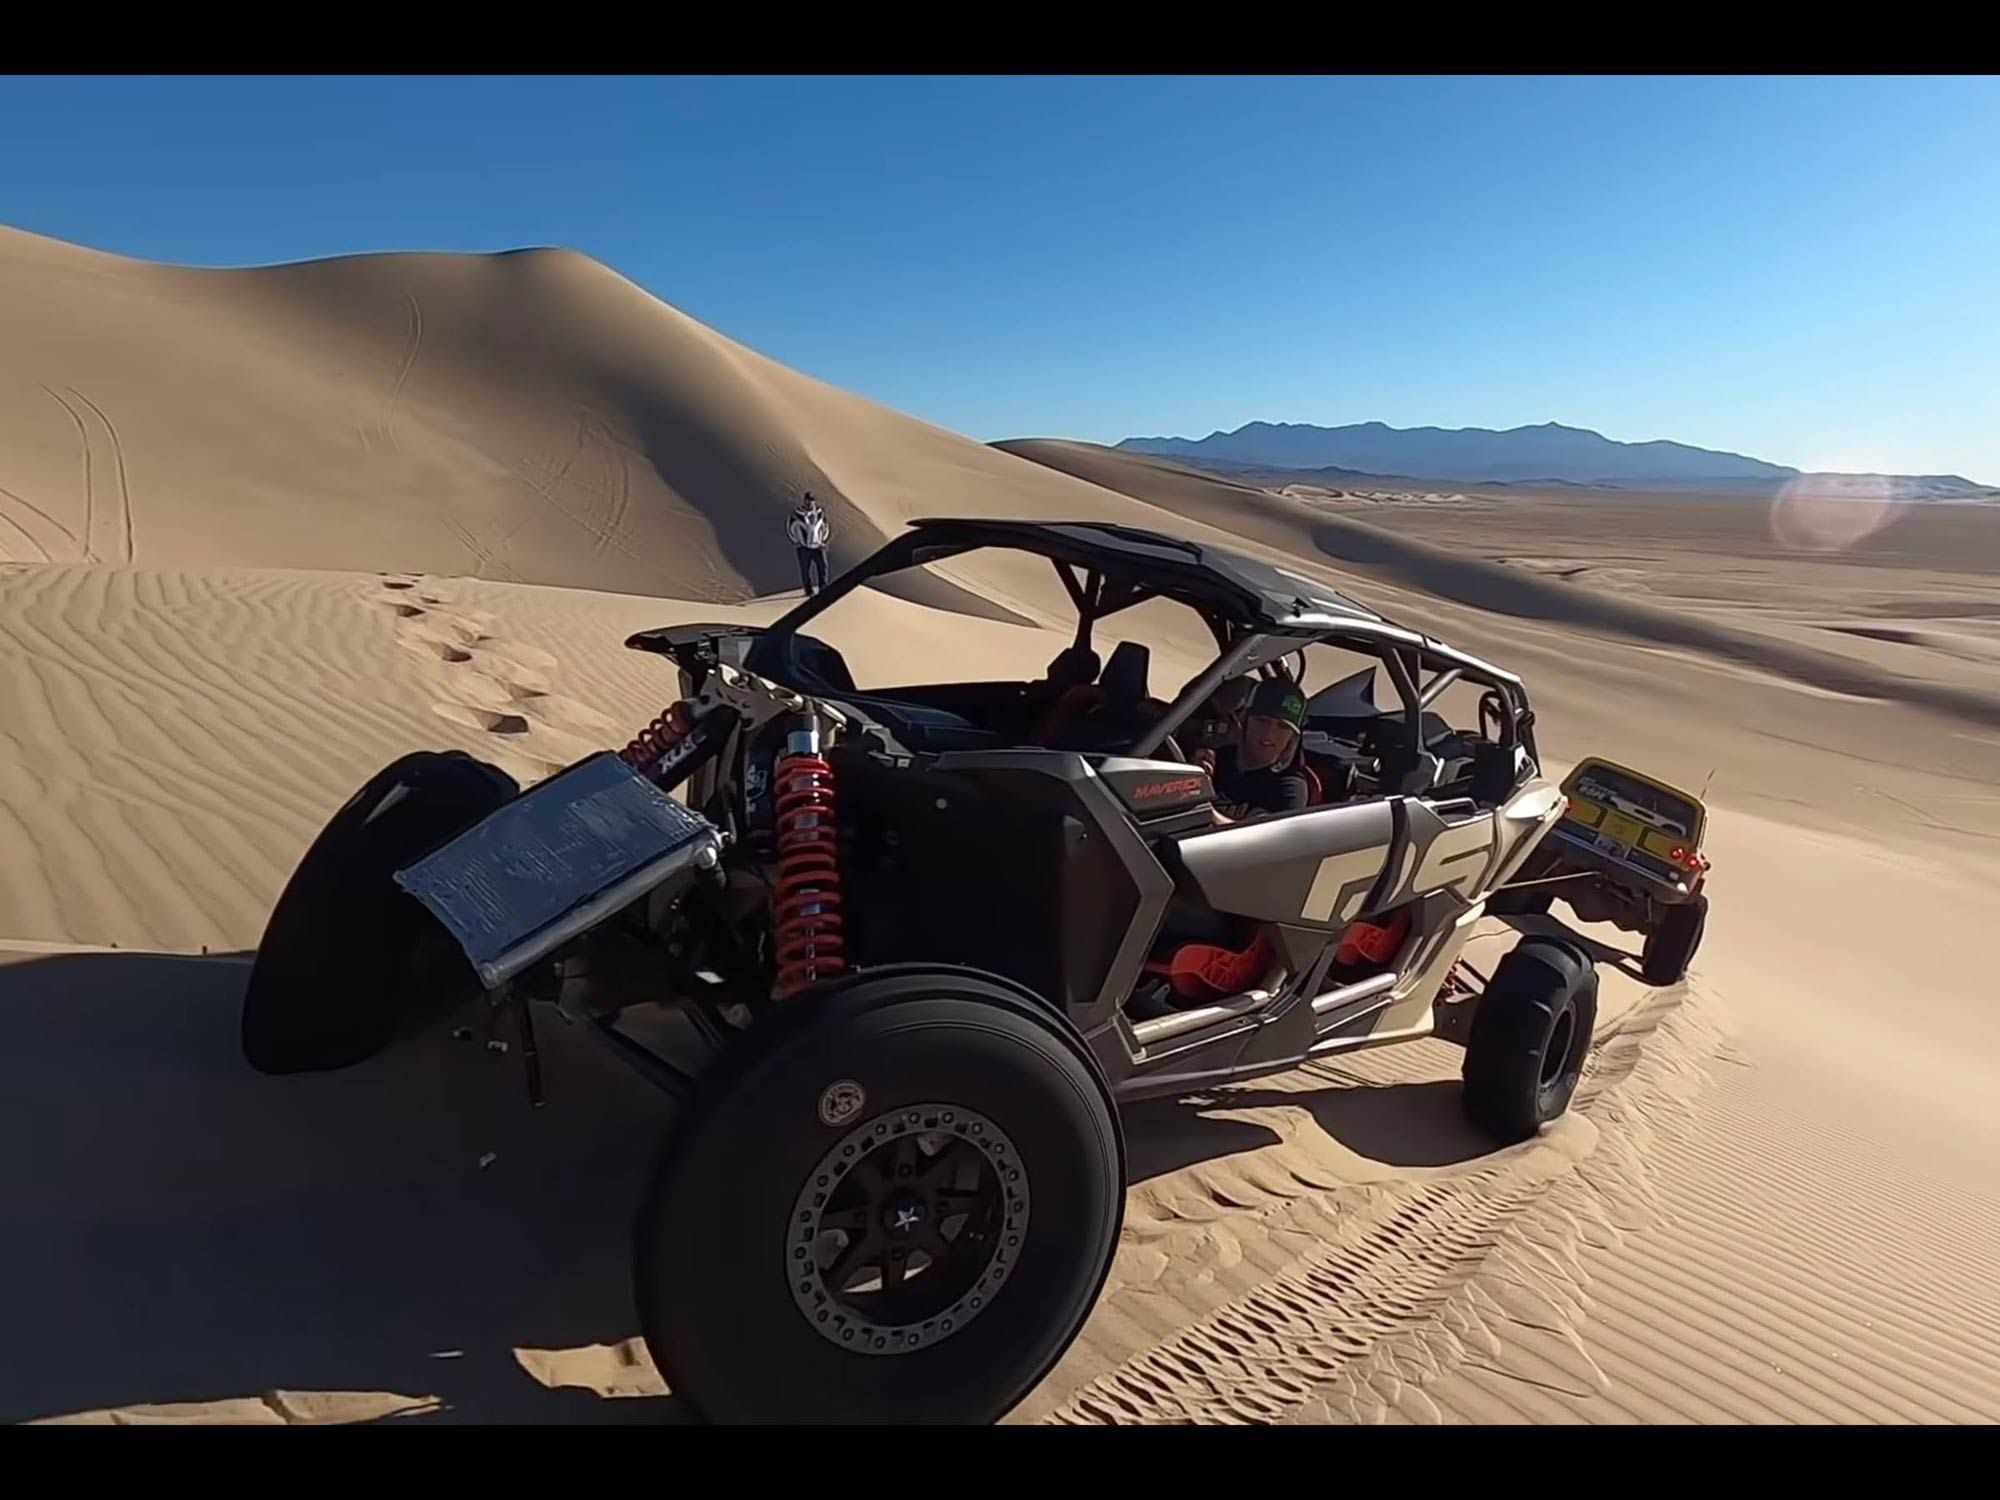 Matt's Off-Road Recovery ended up in the Dumont sand dunes this week on a long rescue of a very broken Can-Am.